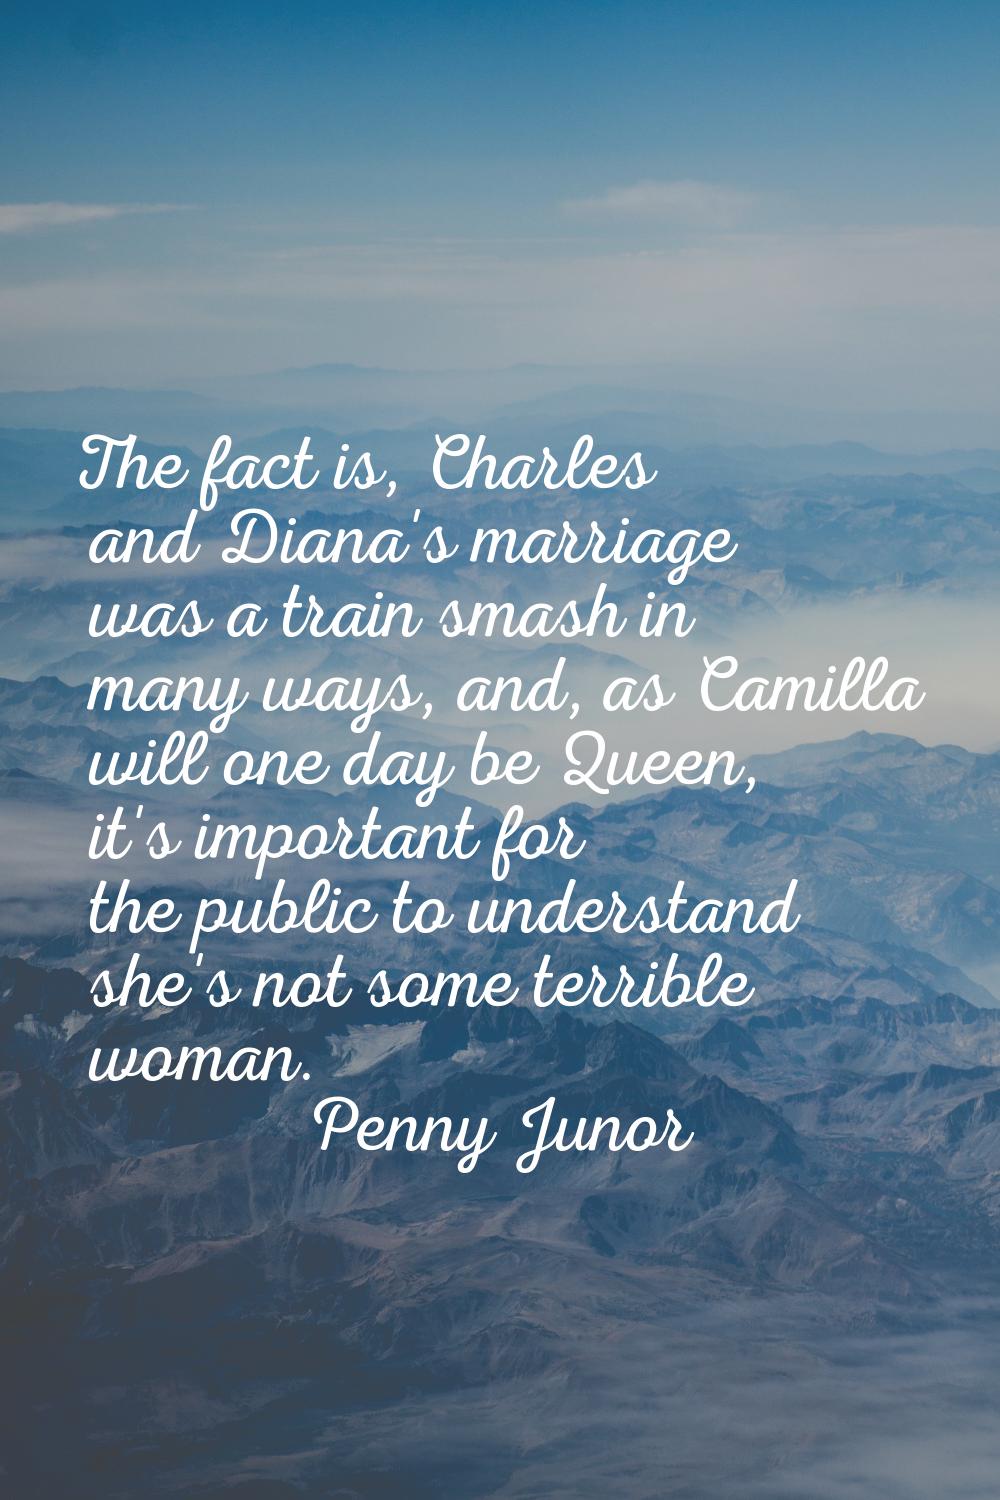 The fact is, Charles and Diana's marriage was a train smash in many ways, and, as Camilla will one 